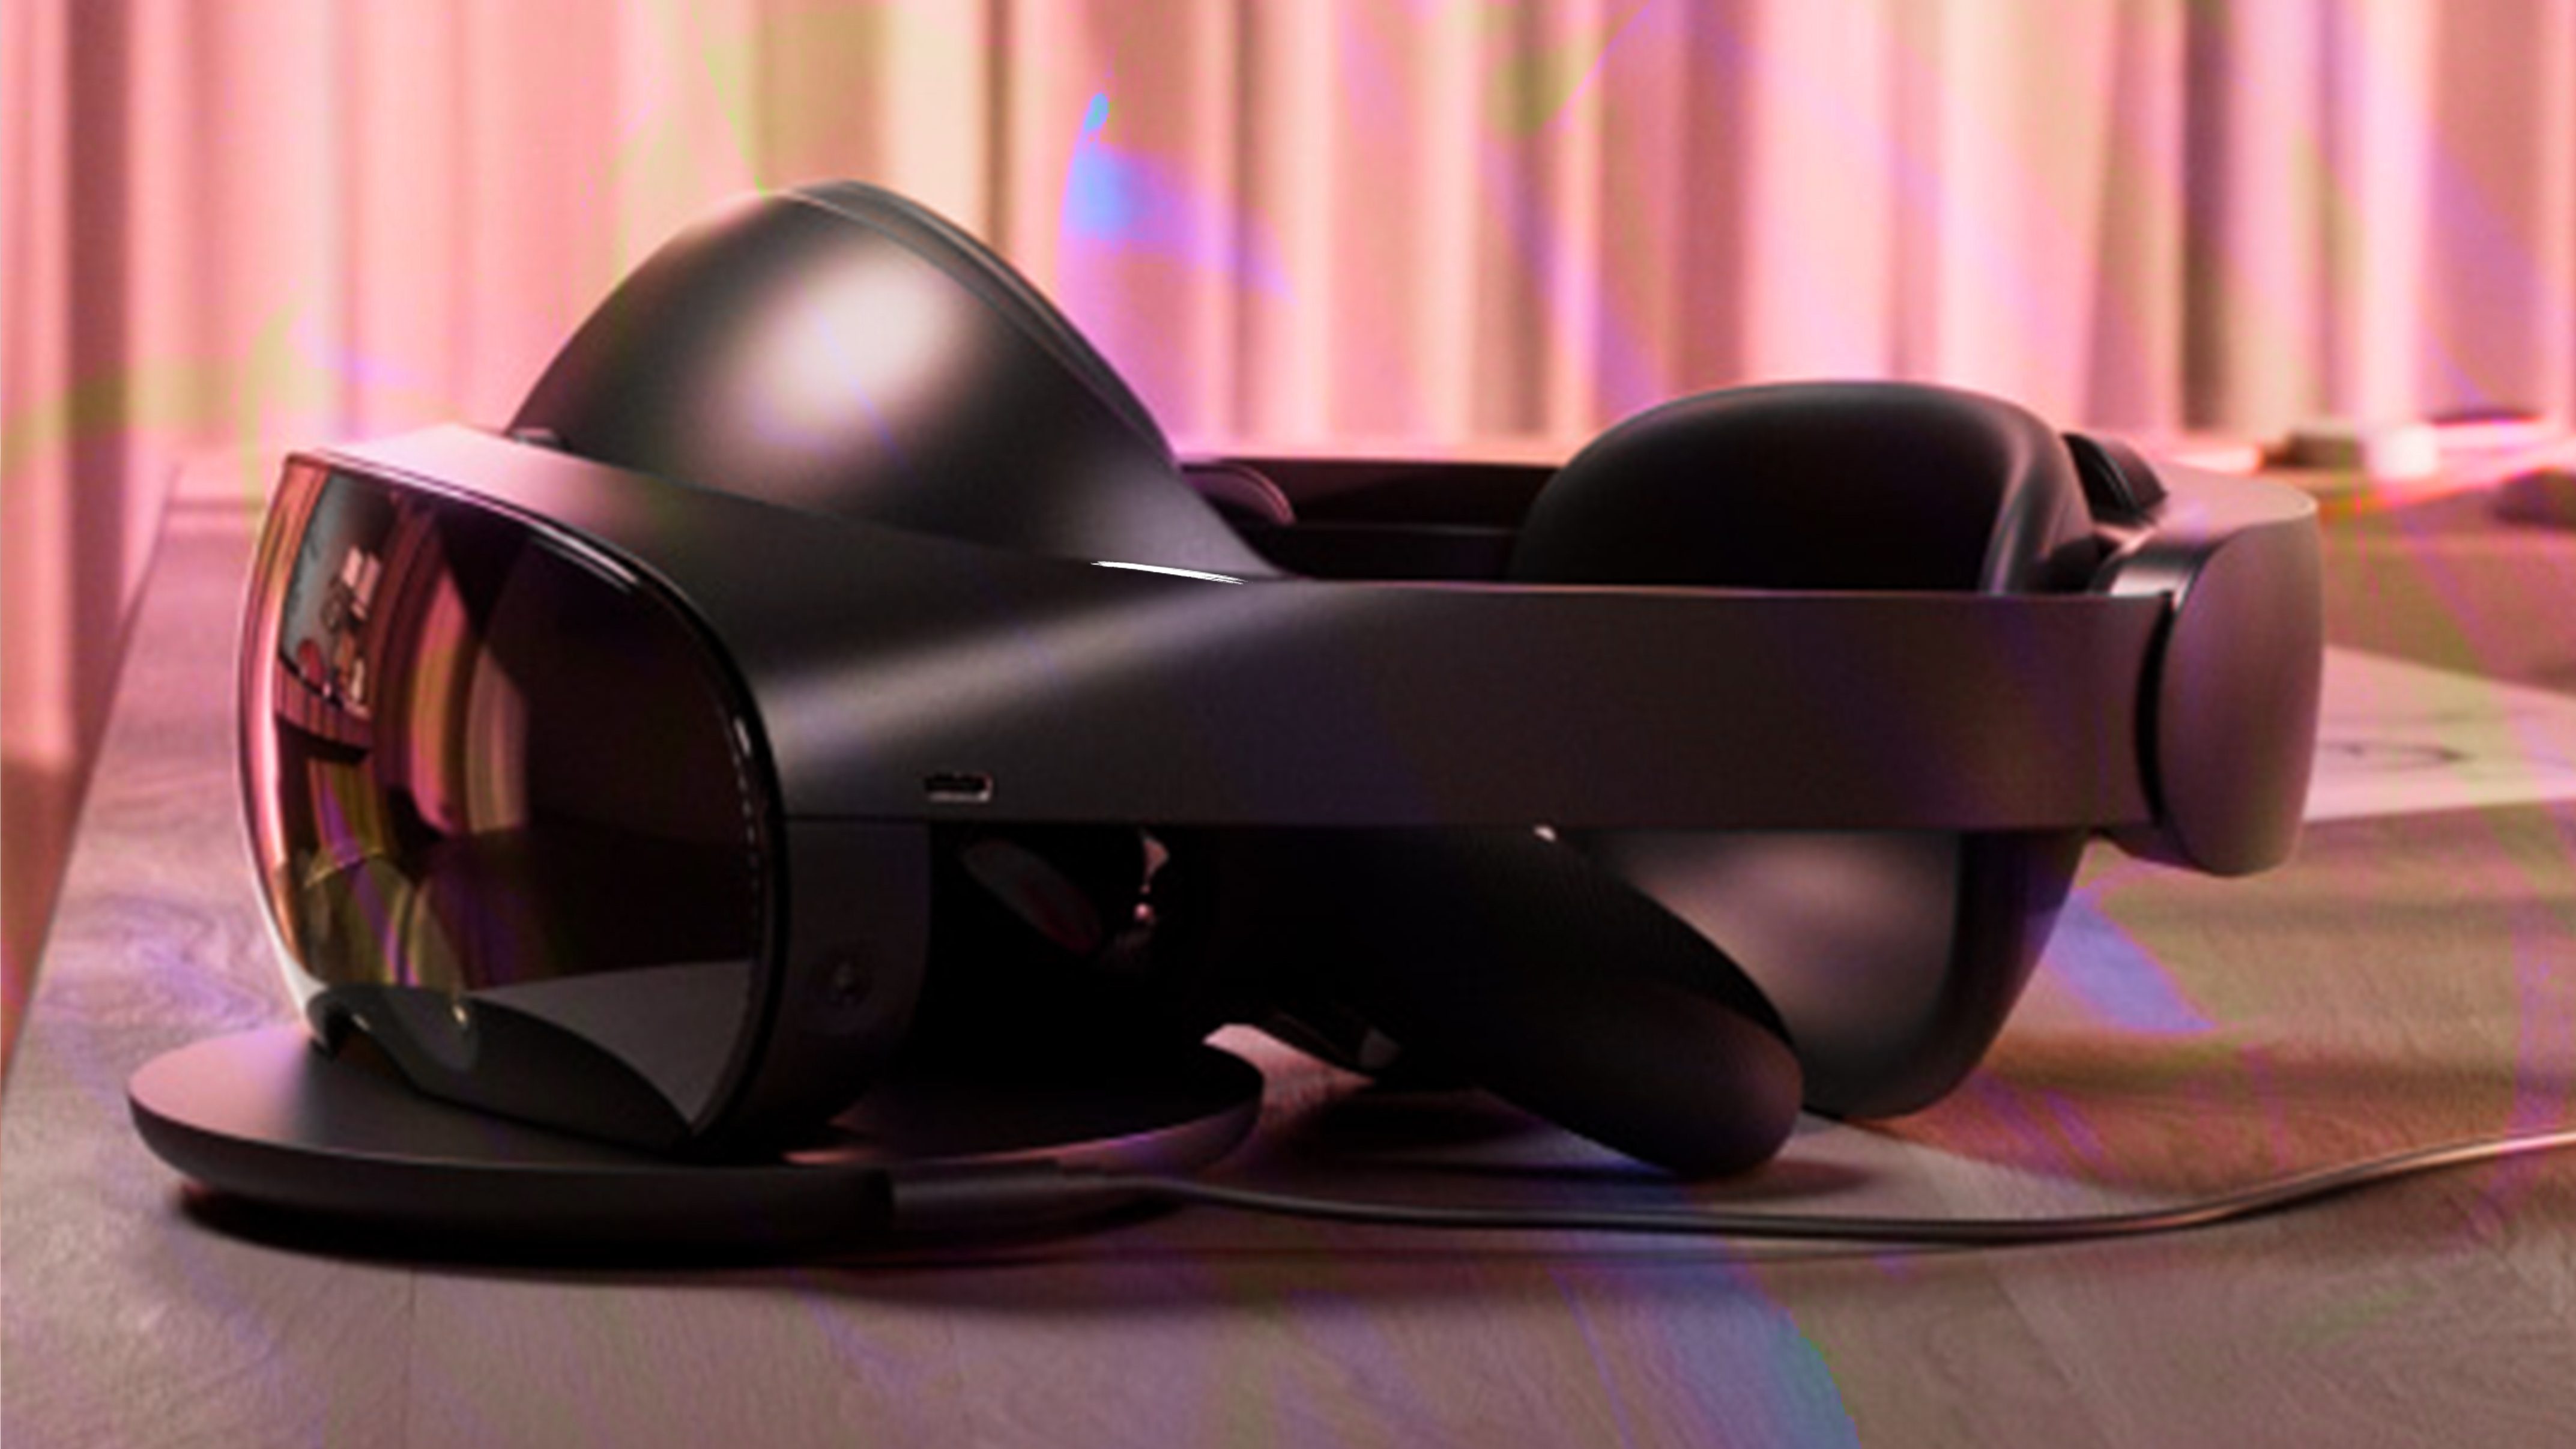 Meta reveals $499 Quest 3 VR headset with fall release date - Polygon